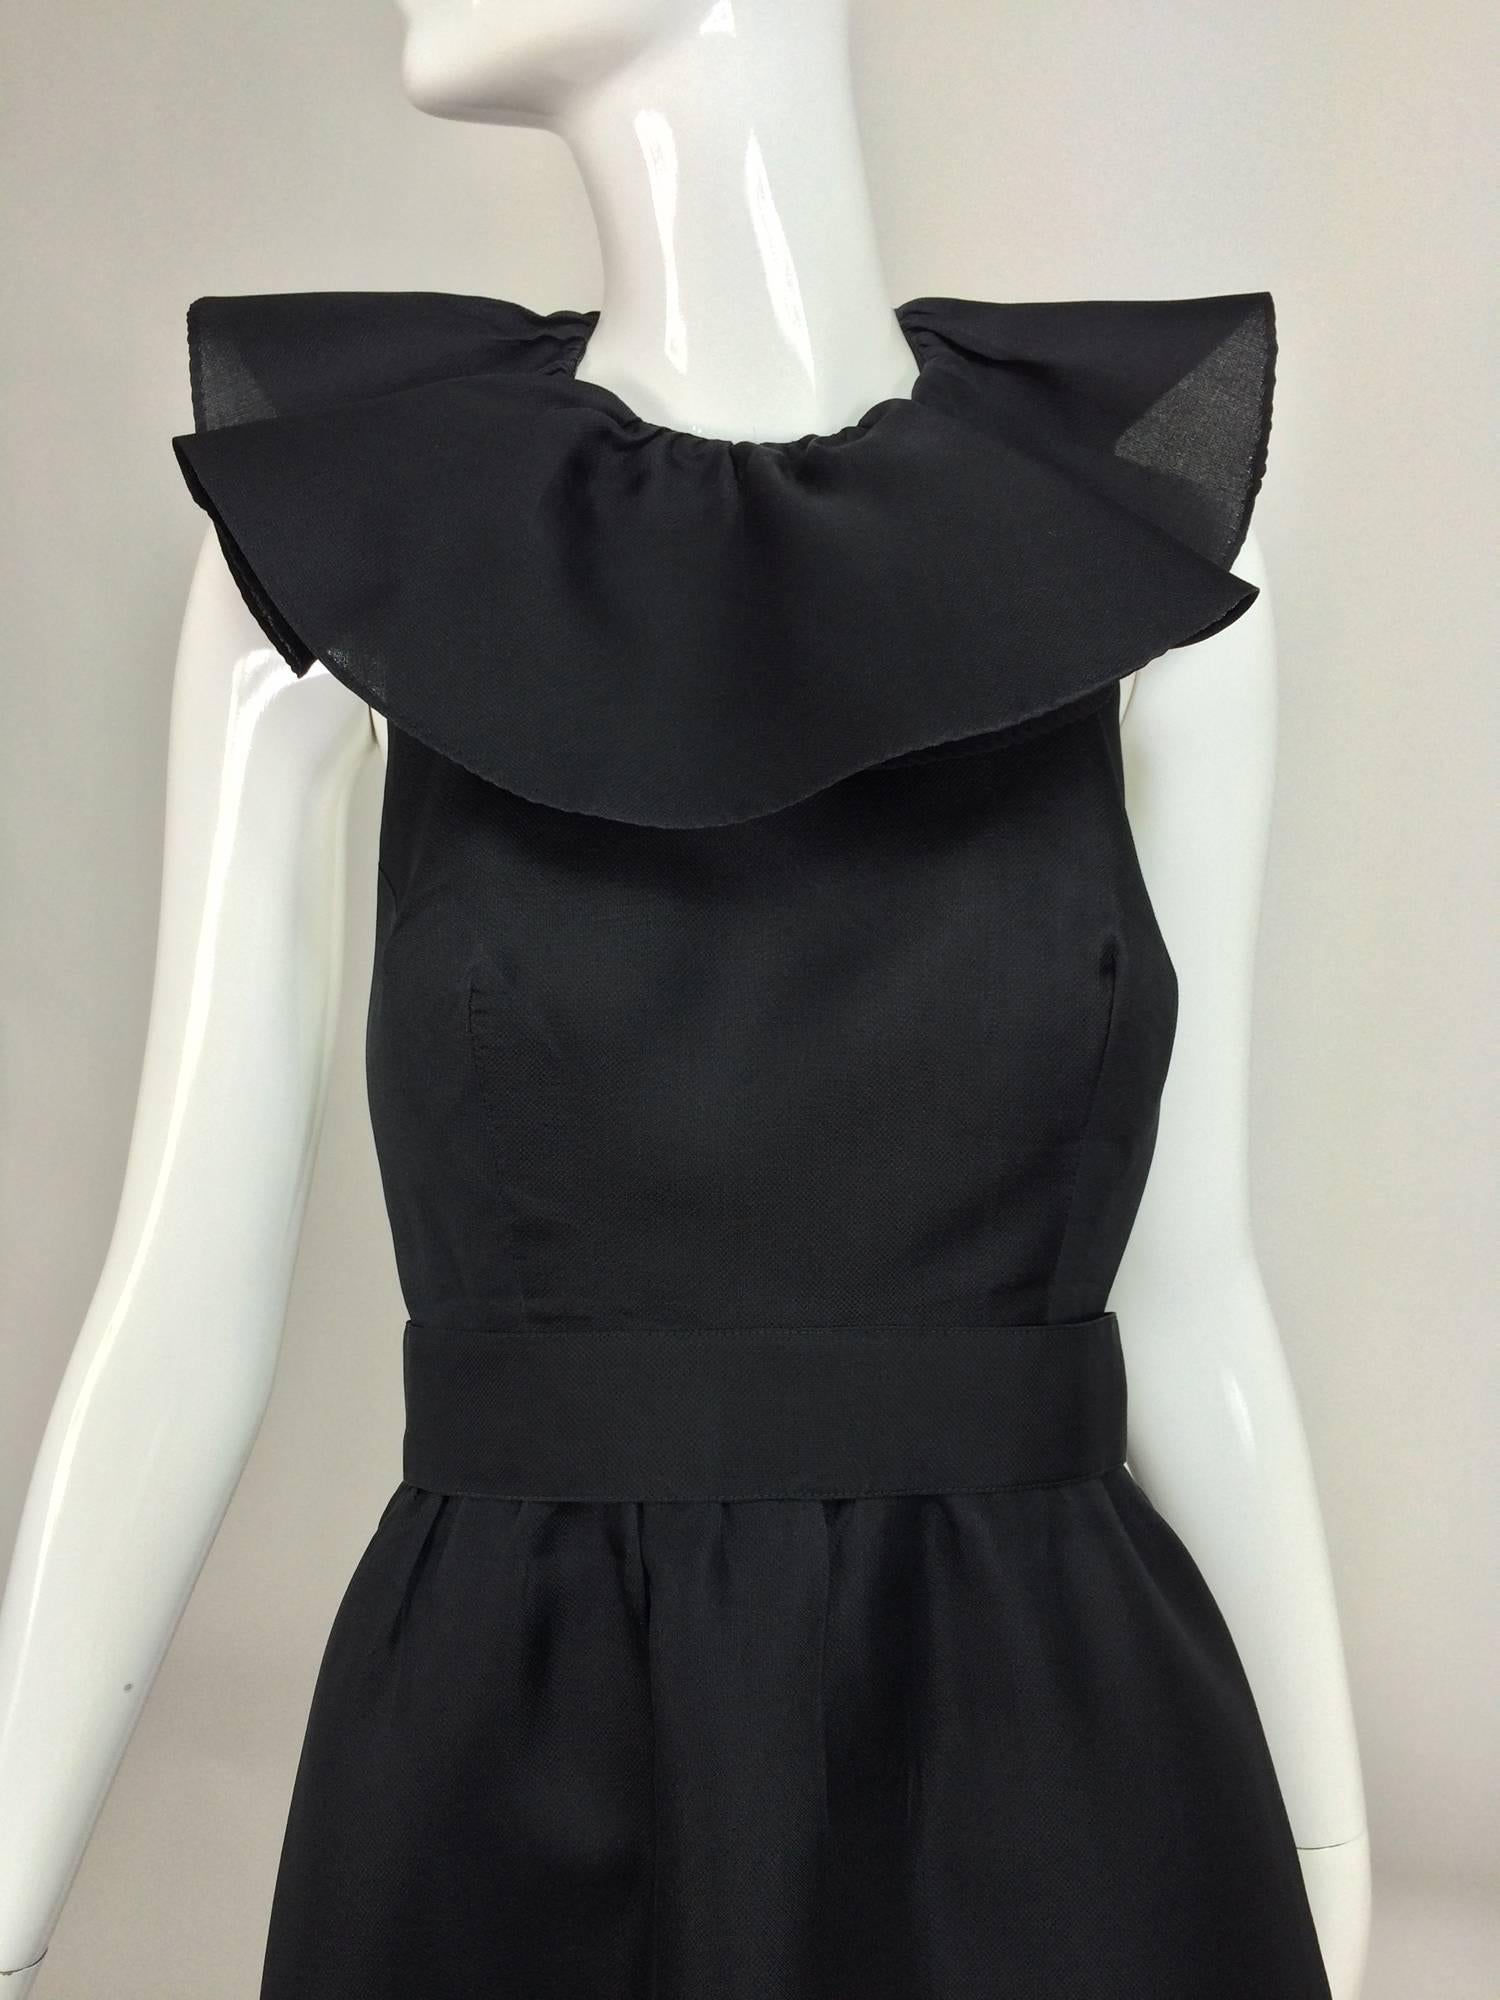 Vintage Nina Ricci black silk organza halter neck evening dress 1990s...Dramatic halter evening dress with a ruffle neck and a large bow at the neck back, low open back to waist...The skirt is lightly gathered at the waist and falls to a deep full